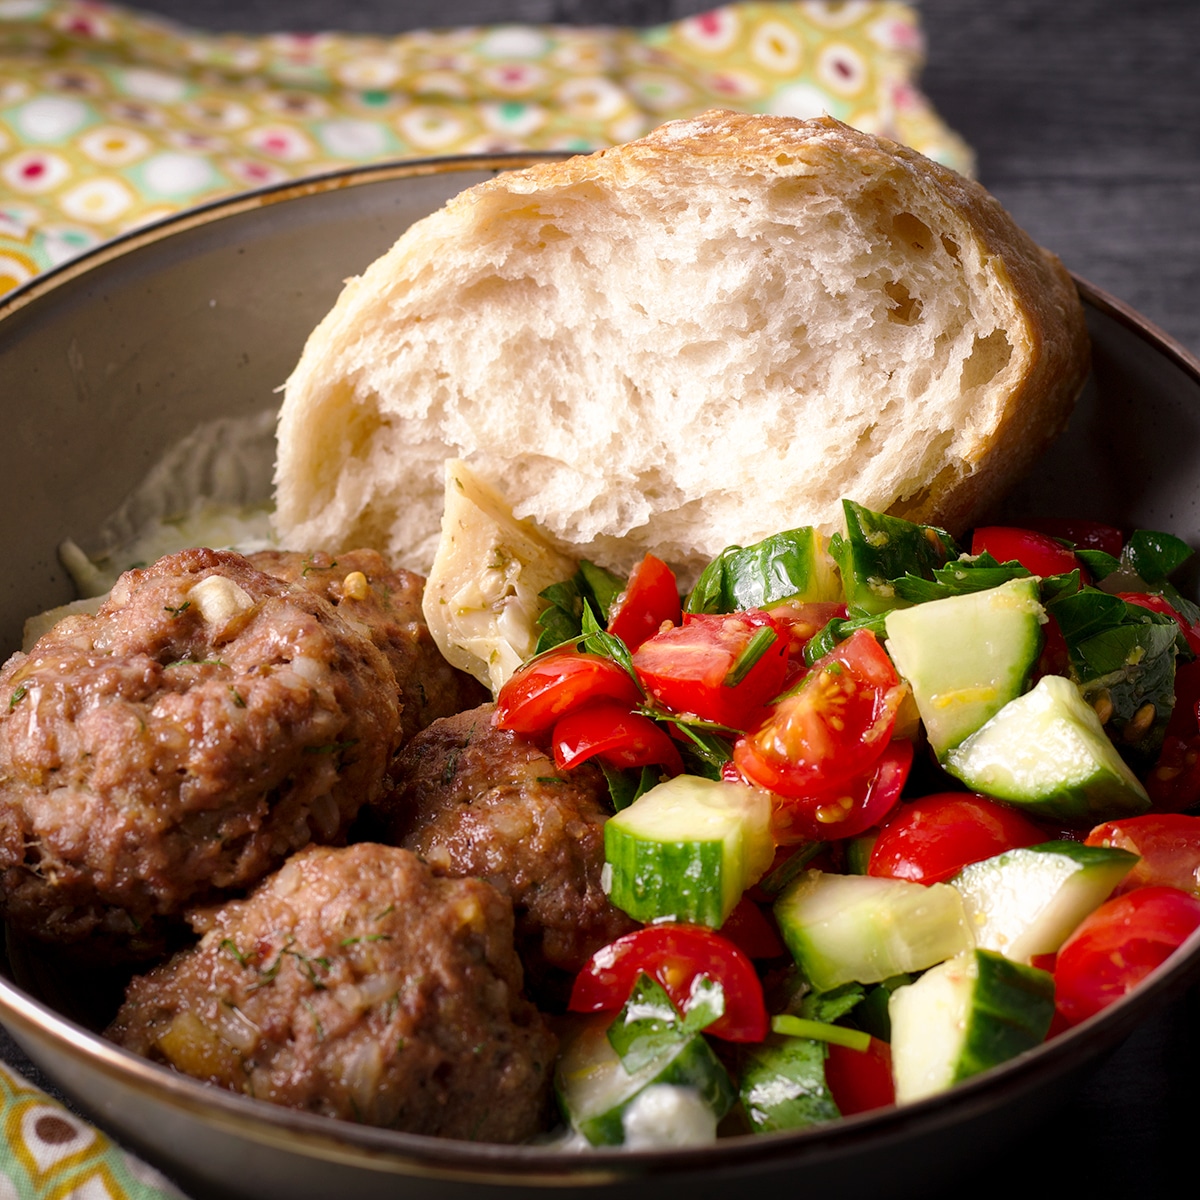 A bowl containing Greek meatballs and tzatziki sauce, and tomato and cucumber salad, and a hunk of white bread.